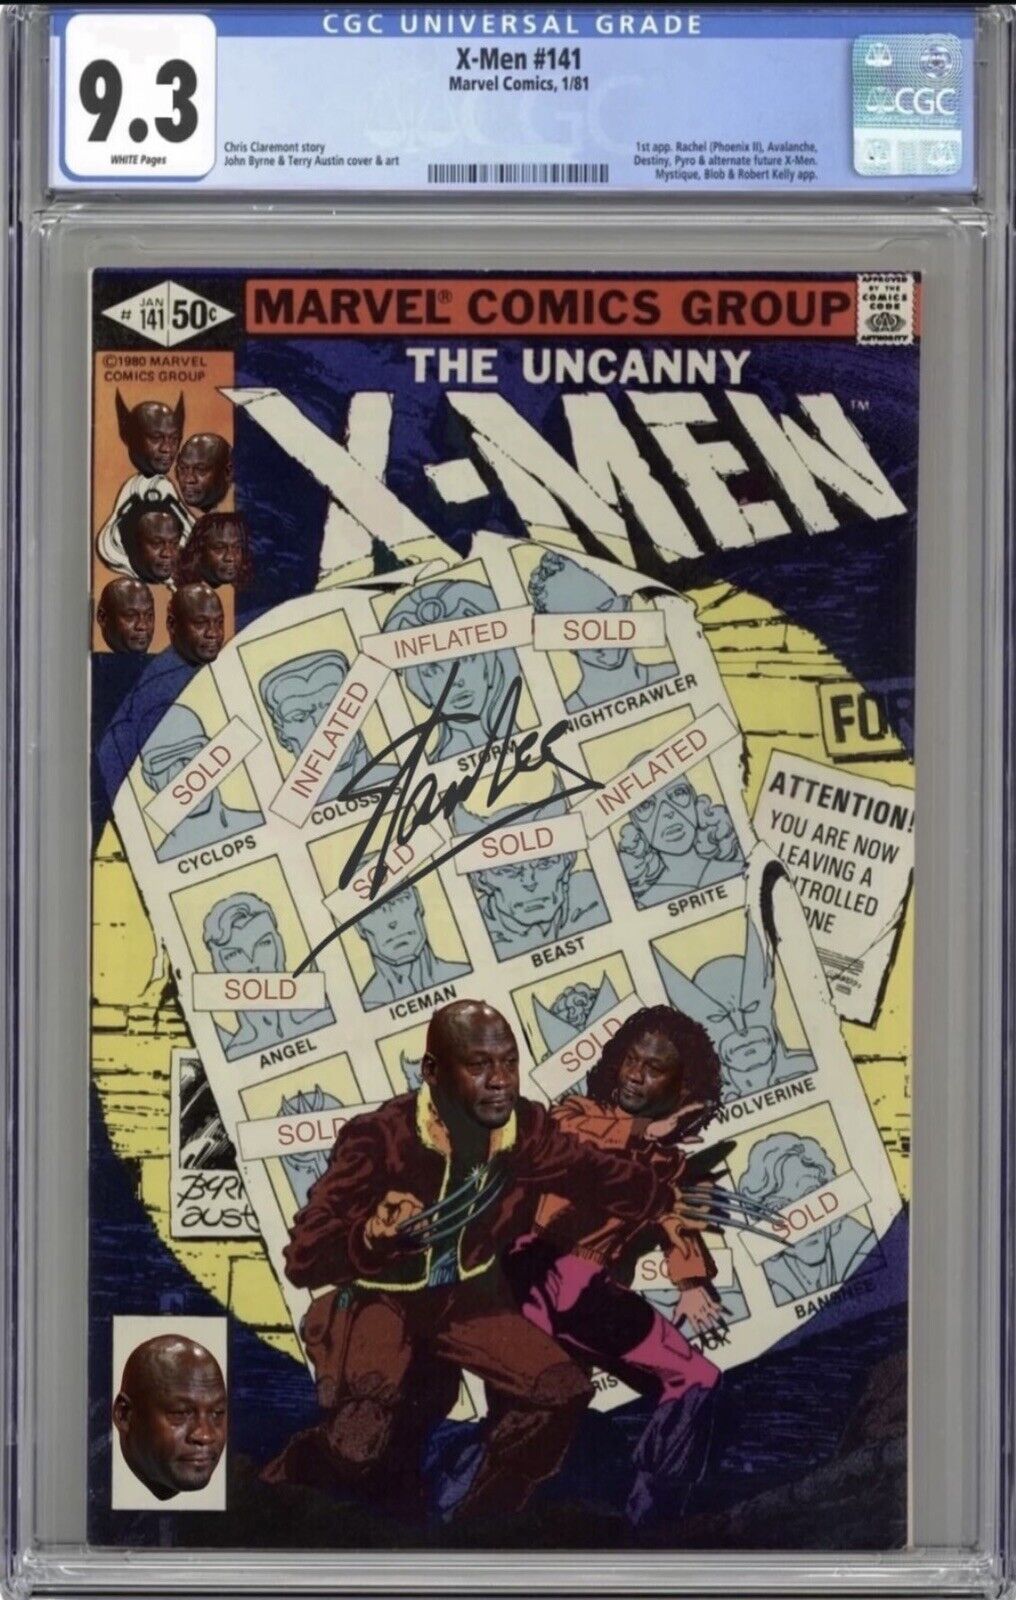 UNCANNY X-MEN #141 CGC 9.3 - DAYS OF FUTURE PAST VERY CLOSE TO MINT